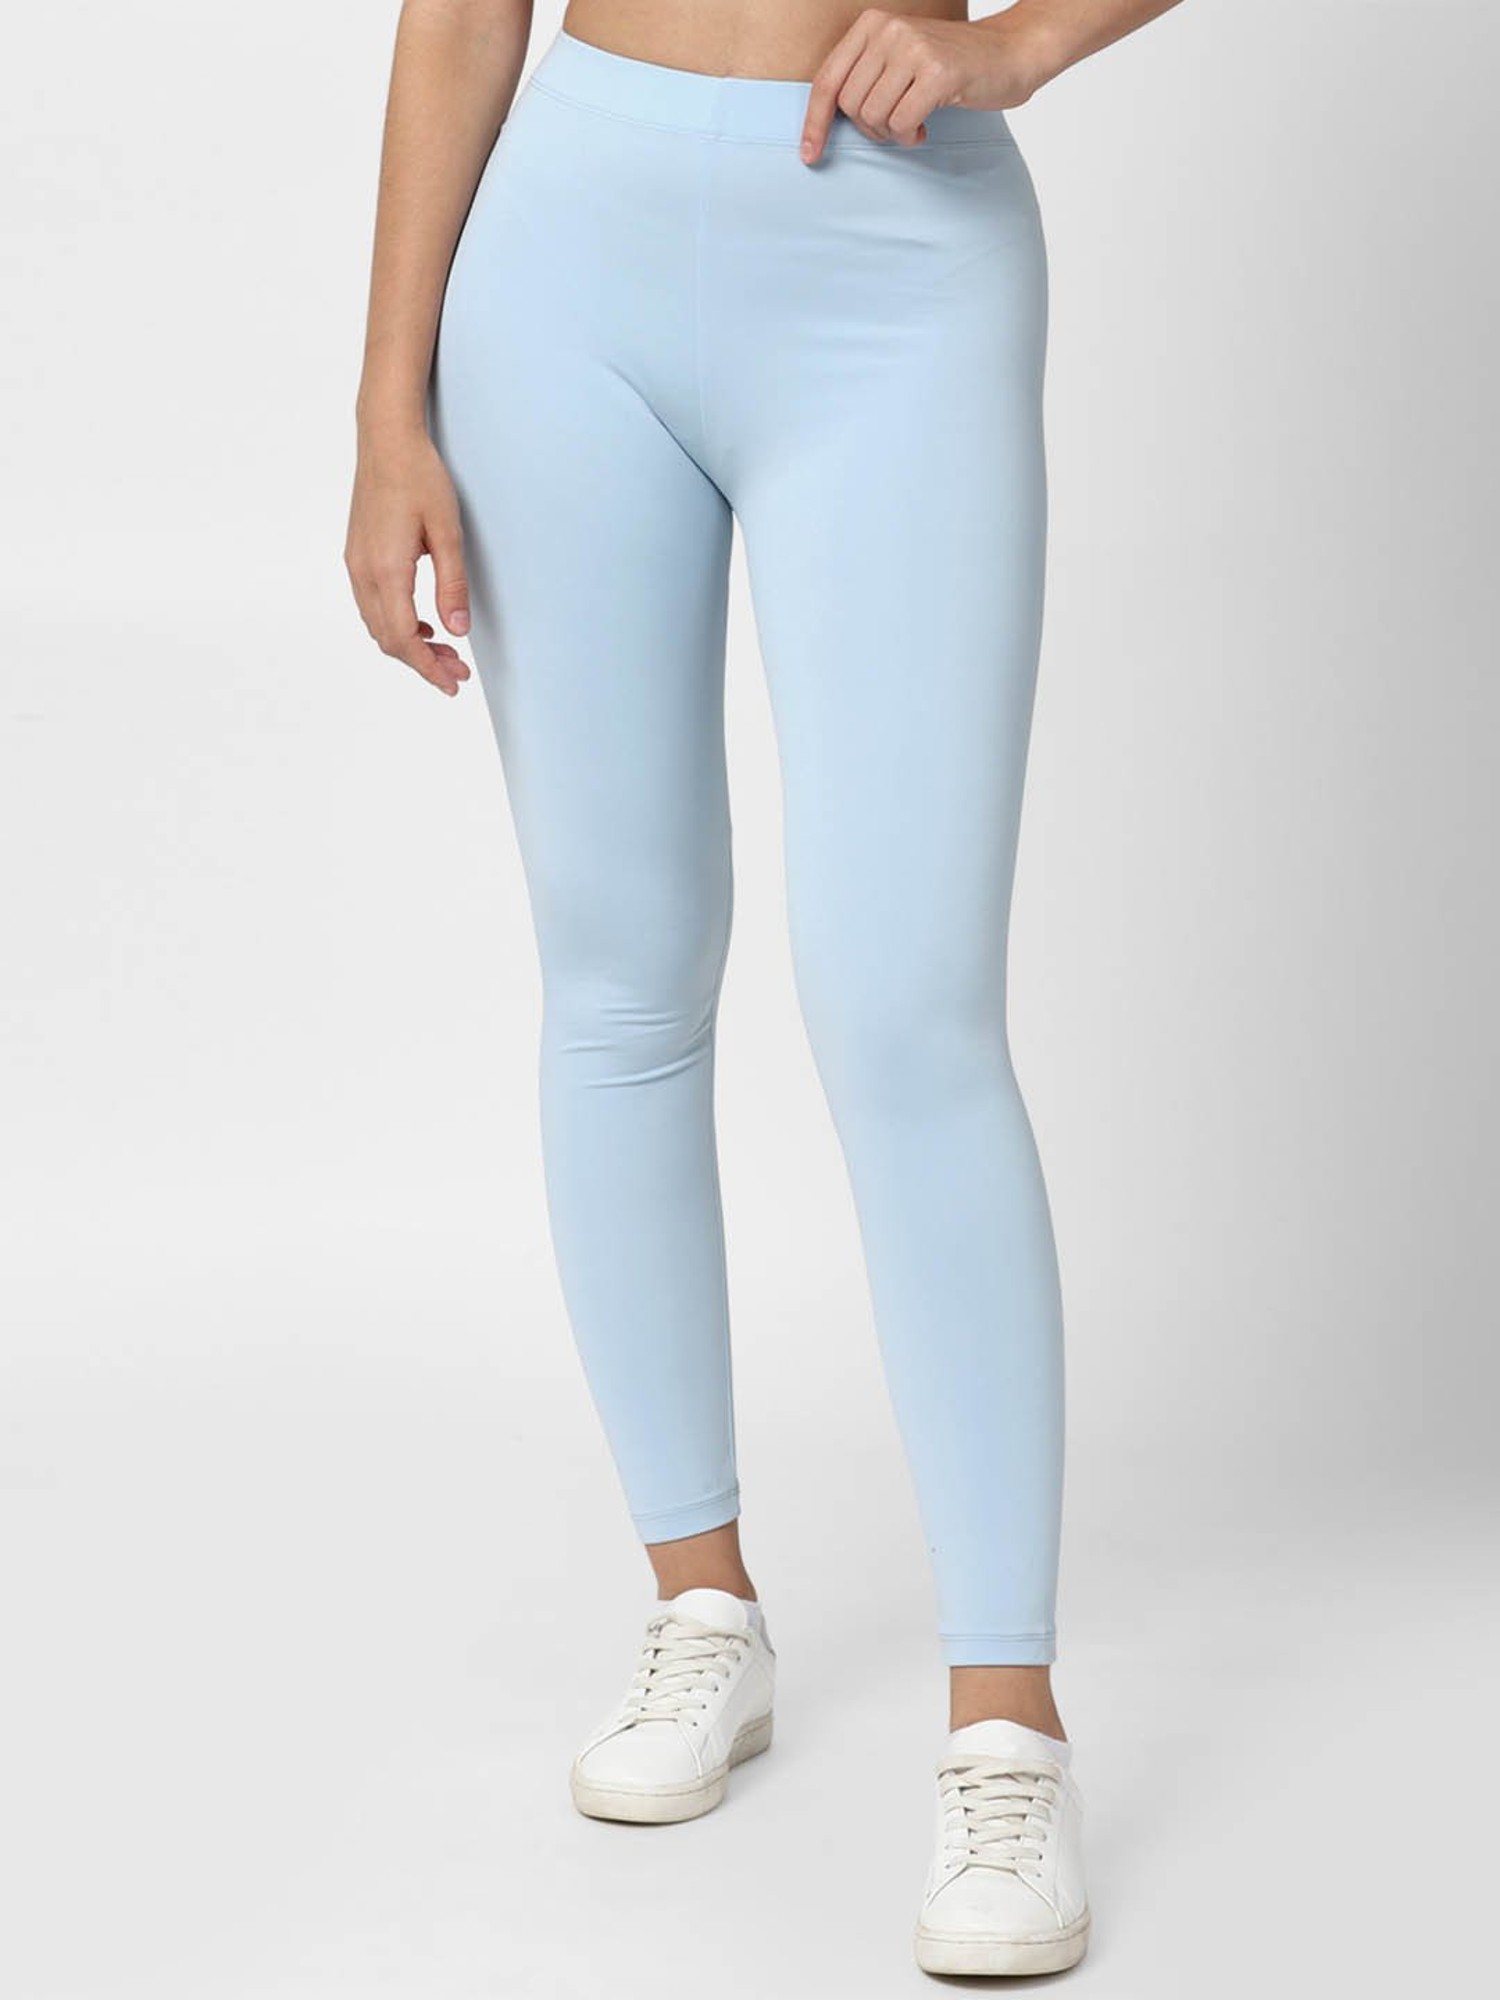 ADULT Fashion Womens Light Blue Leggings with nice Black band-sonthuy.vn